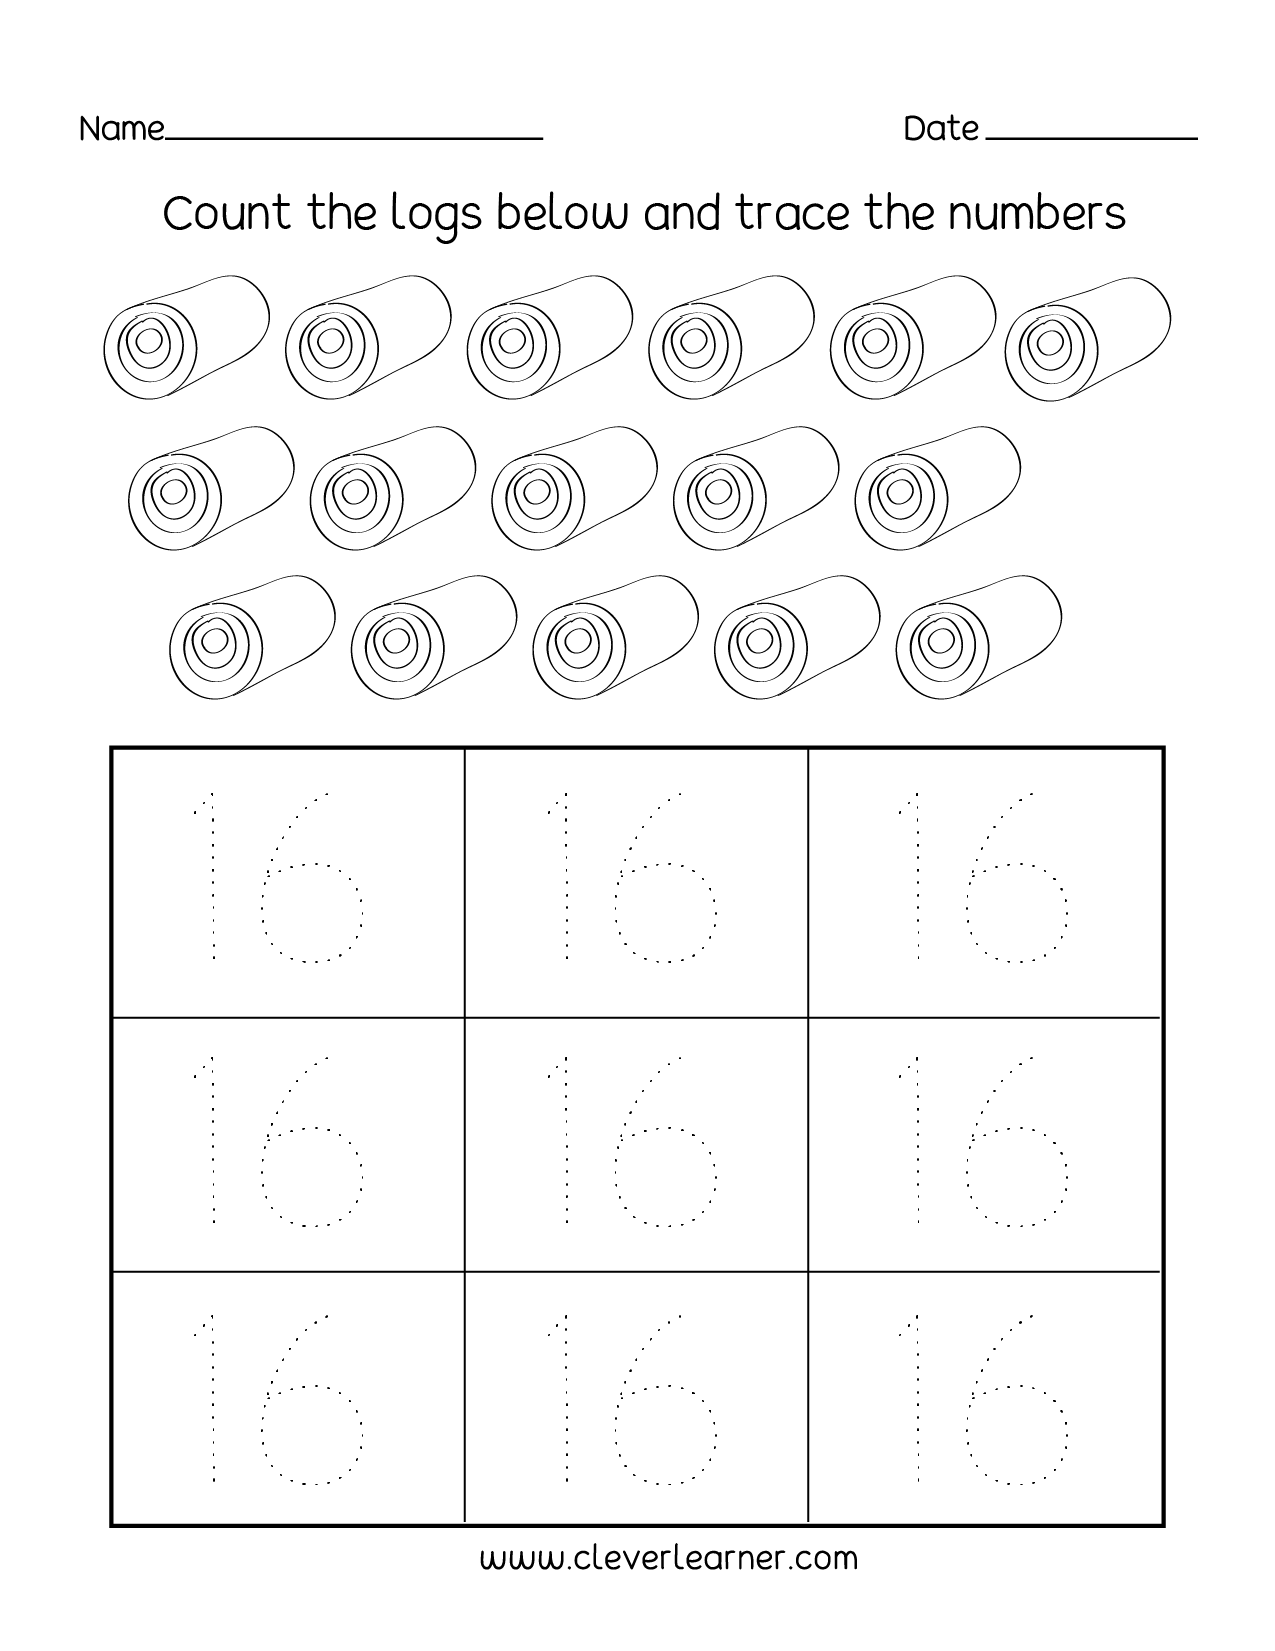 number-16-writing-counting-and-identification-printable-worksheets-for-children